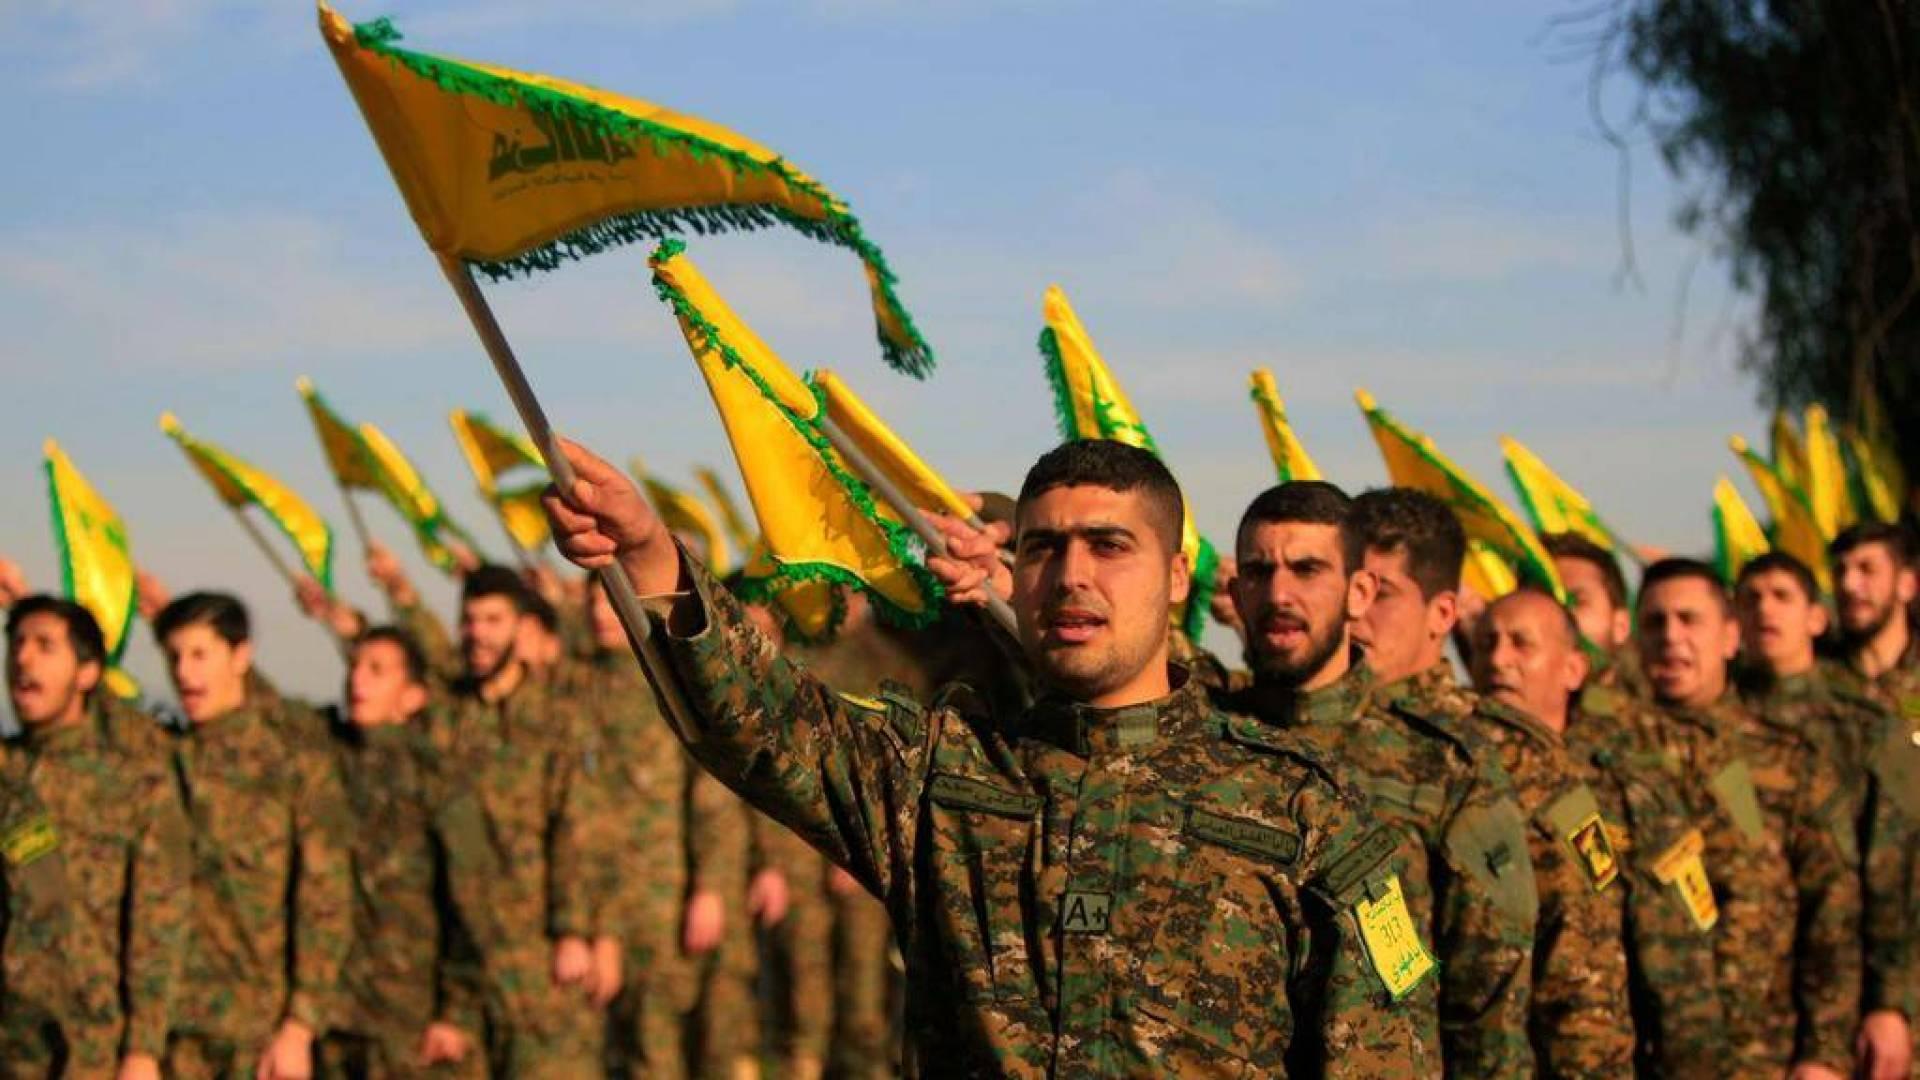 The United States has hit Hezbollah with fresh sanctions as part of its strategy to counter Iran.